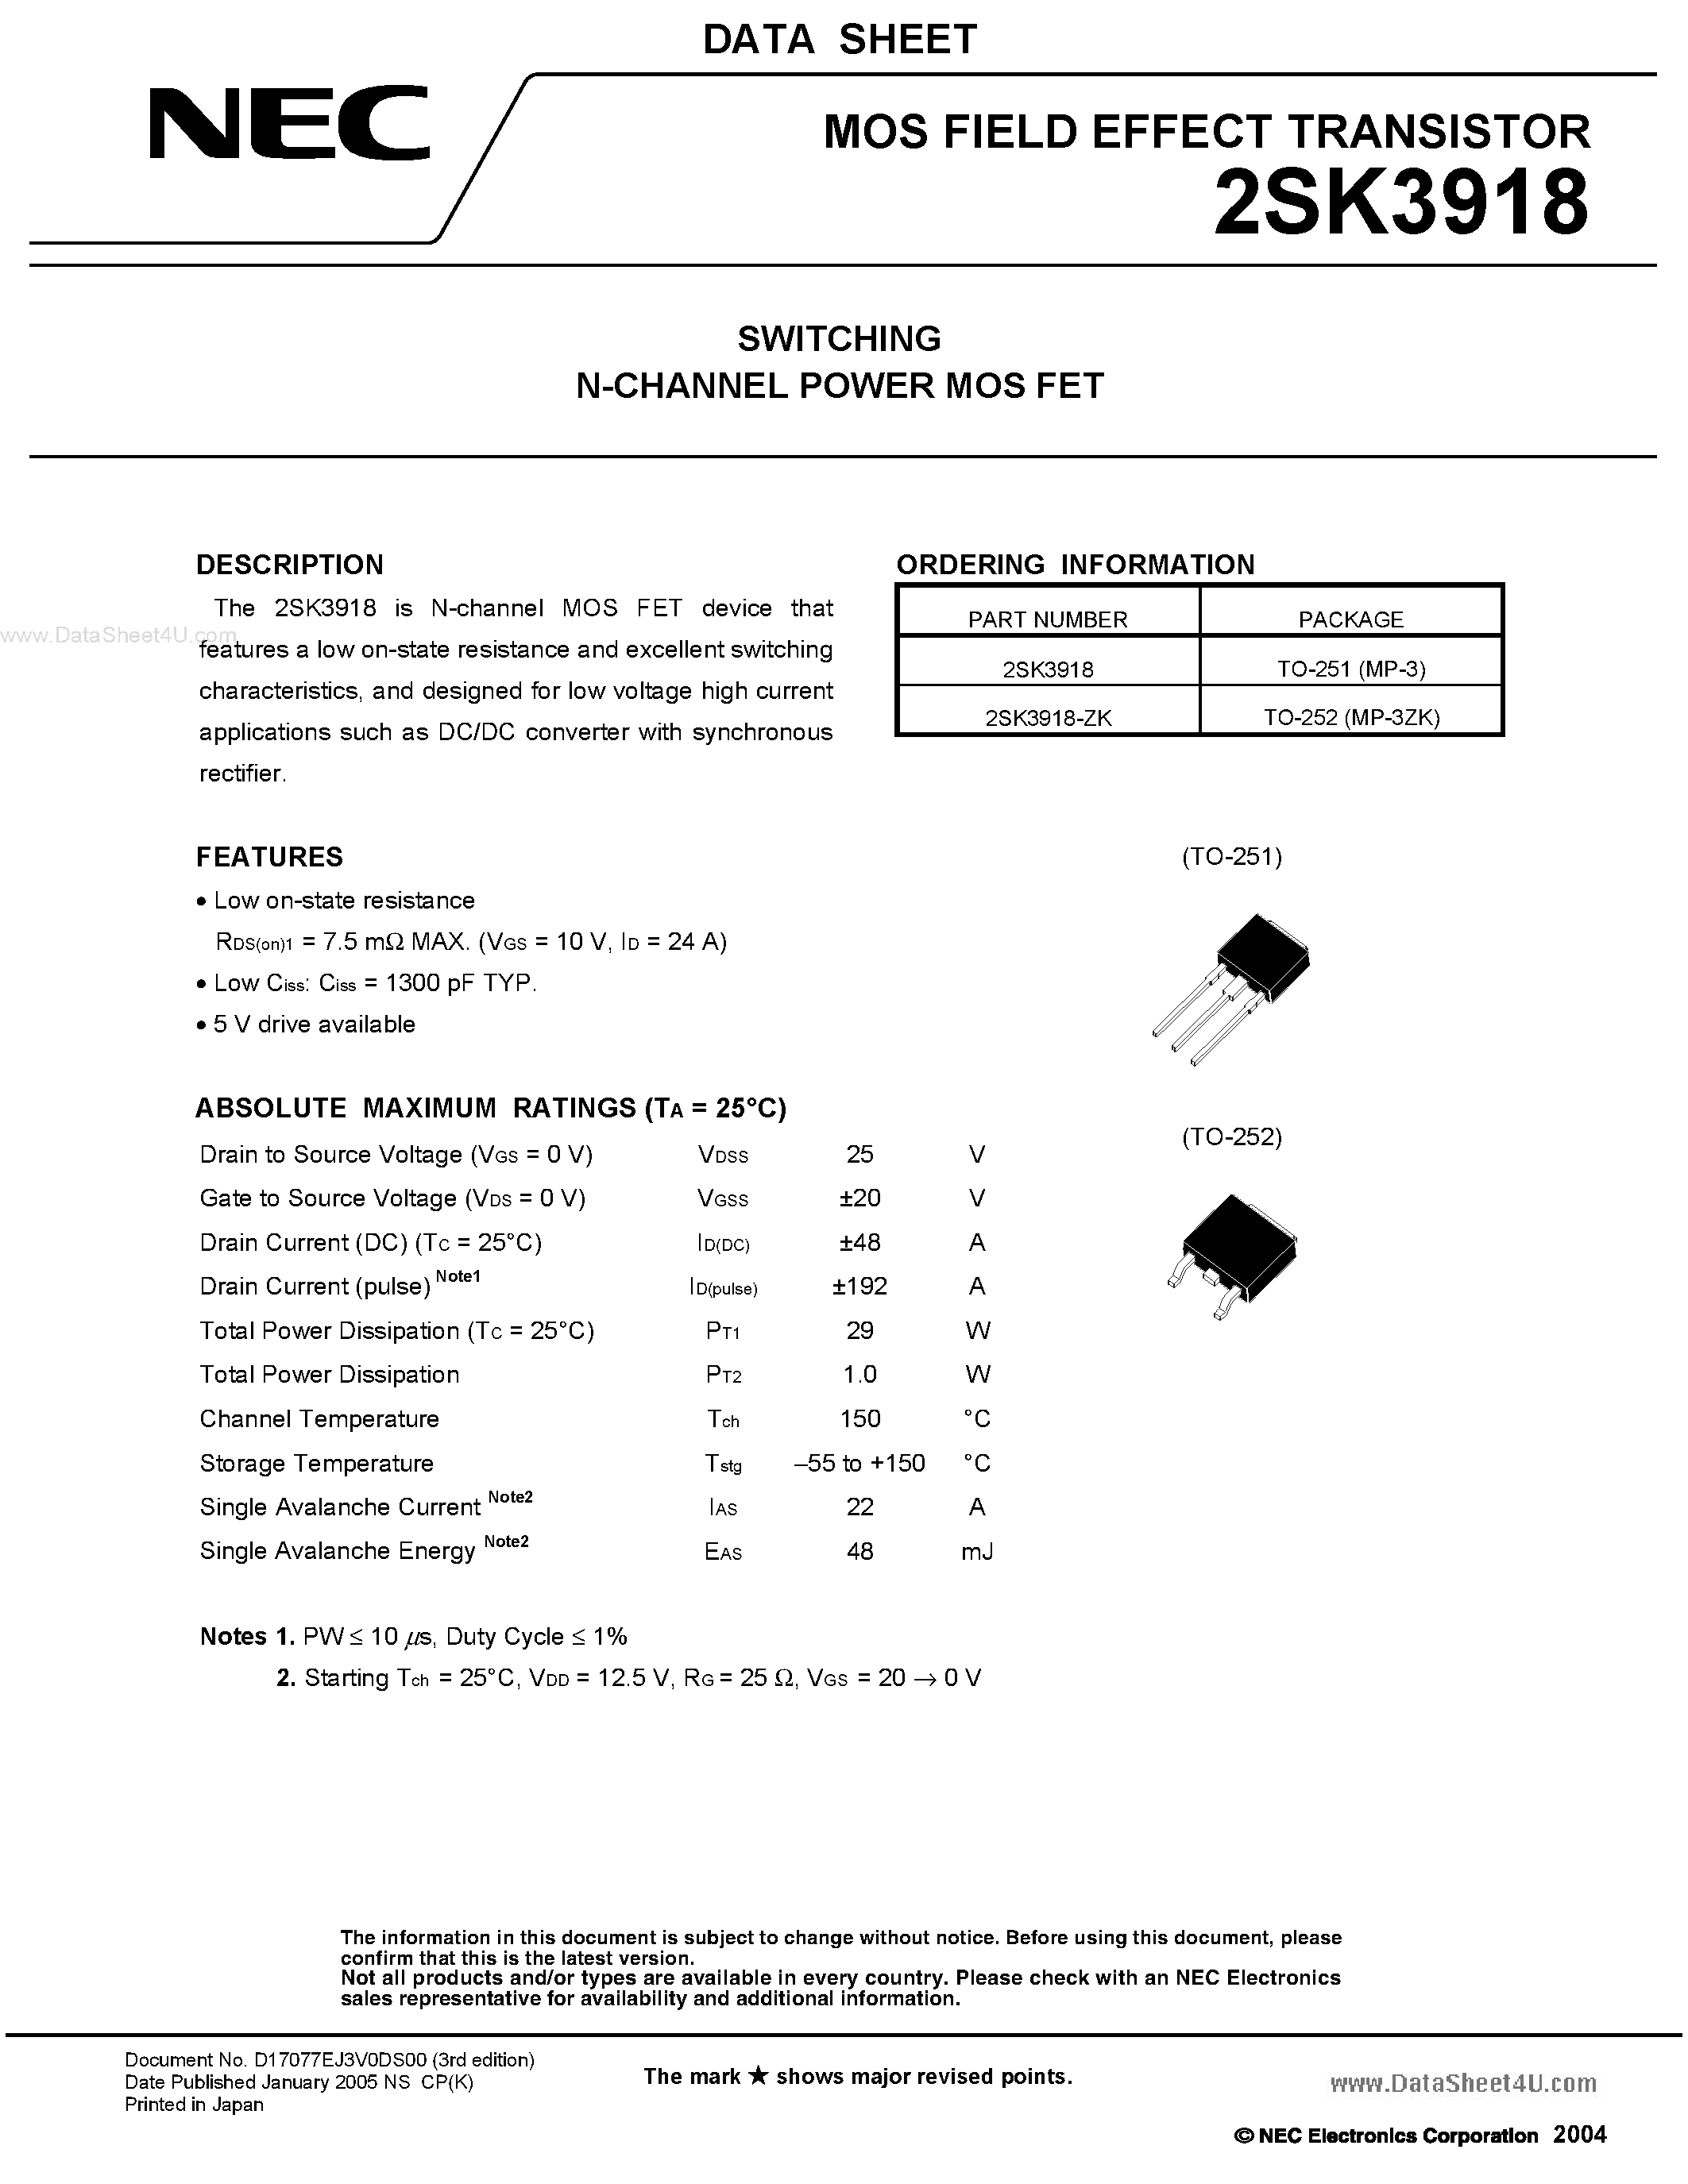 Datasheet K3918 - Search -----> 2SK3918 page 1